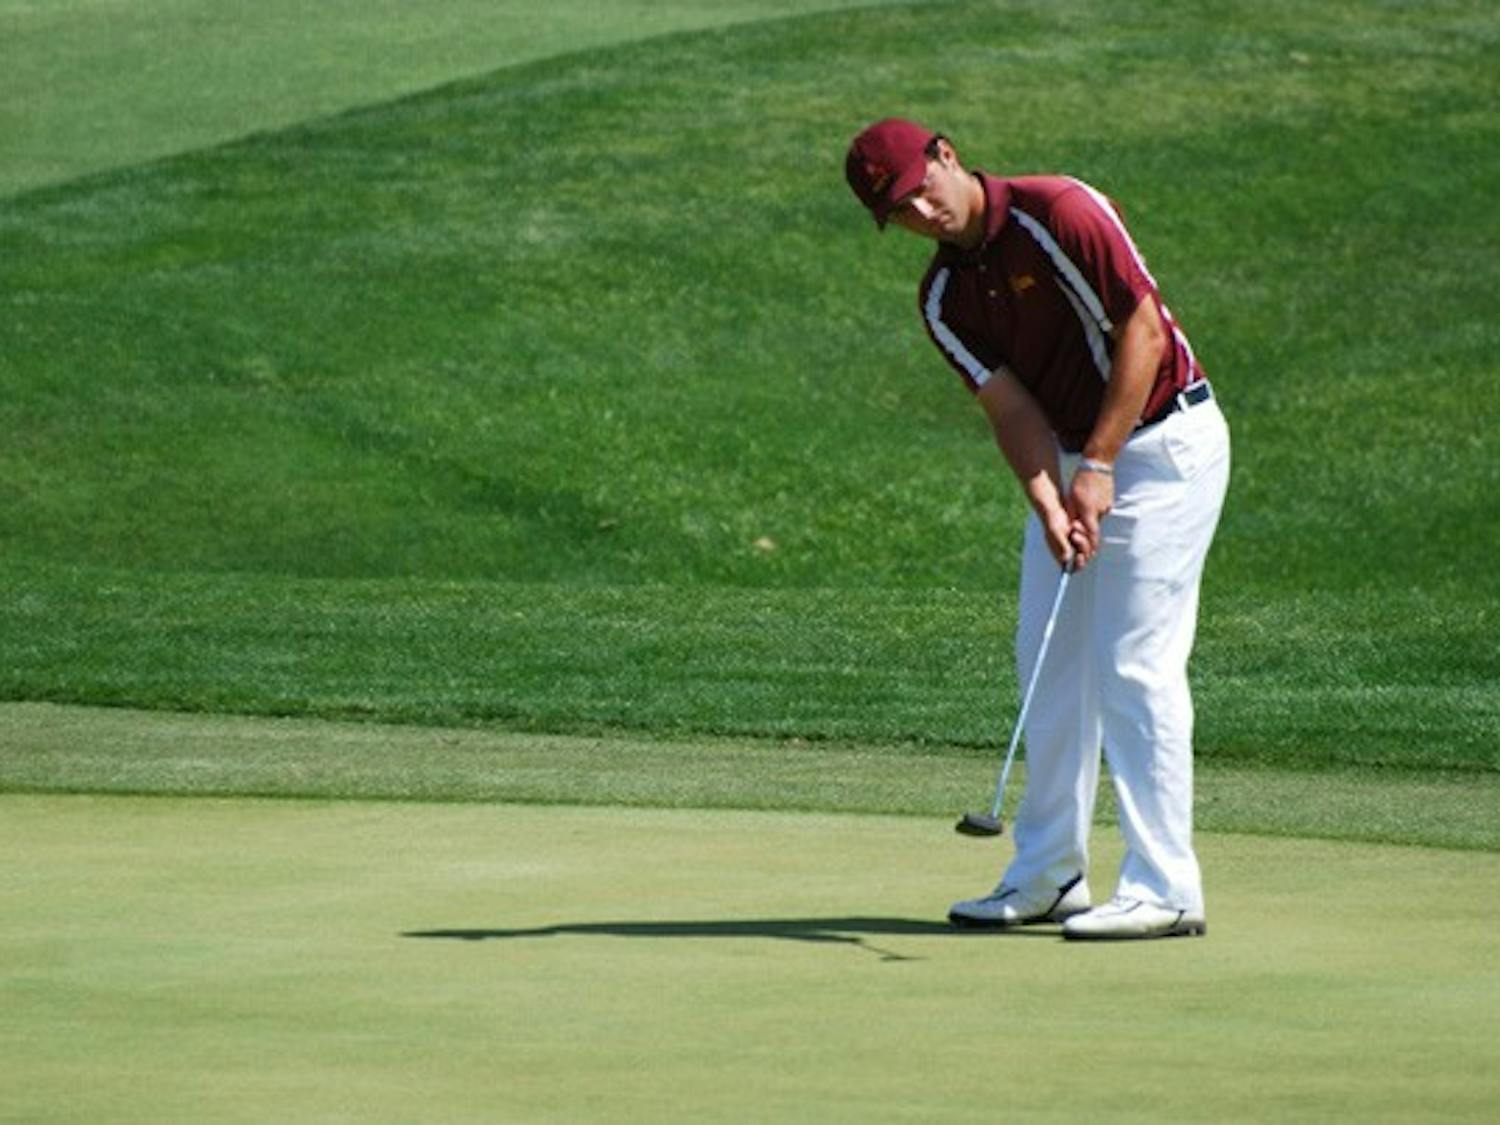 Junior Jon Rahm Rodriguez watches to see if his putt will find the whole during the ASU Thunderbird Invitational on April 7, 2013. Rahm is preparing to participate in the Phoenix Open (Photo by Murphy Bannerman)